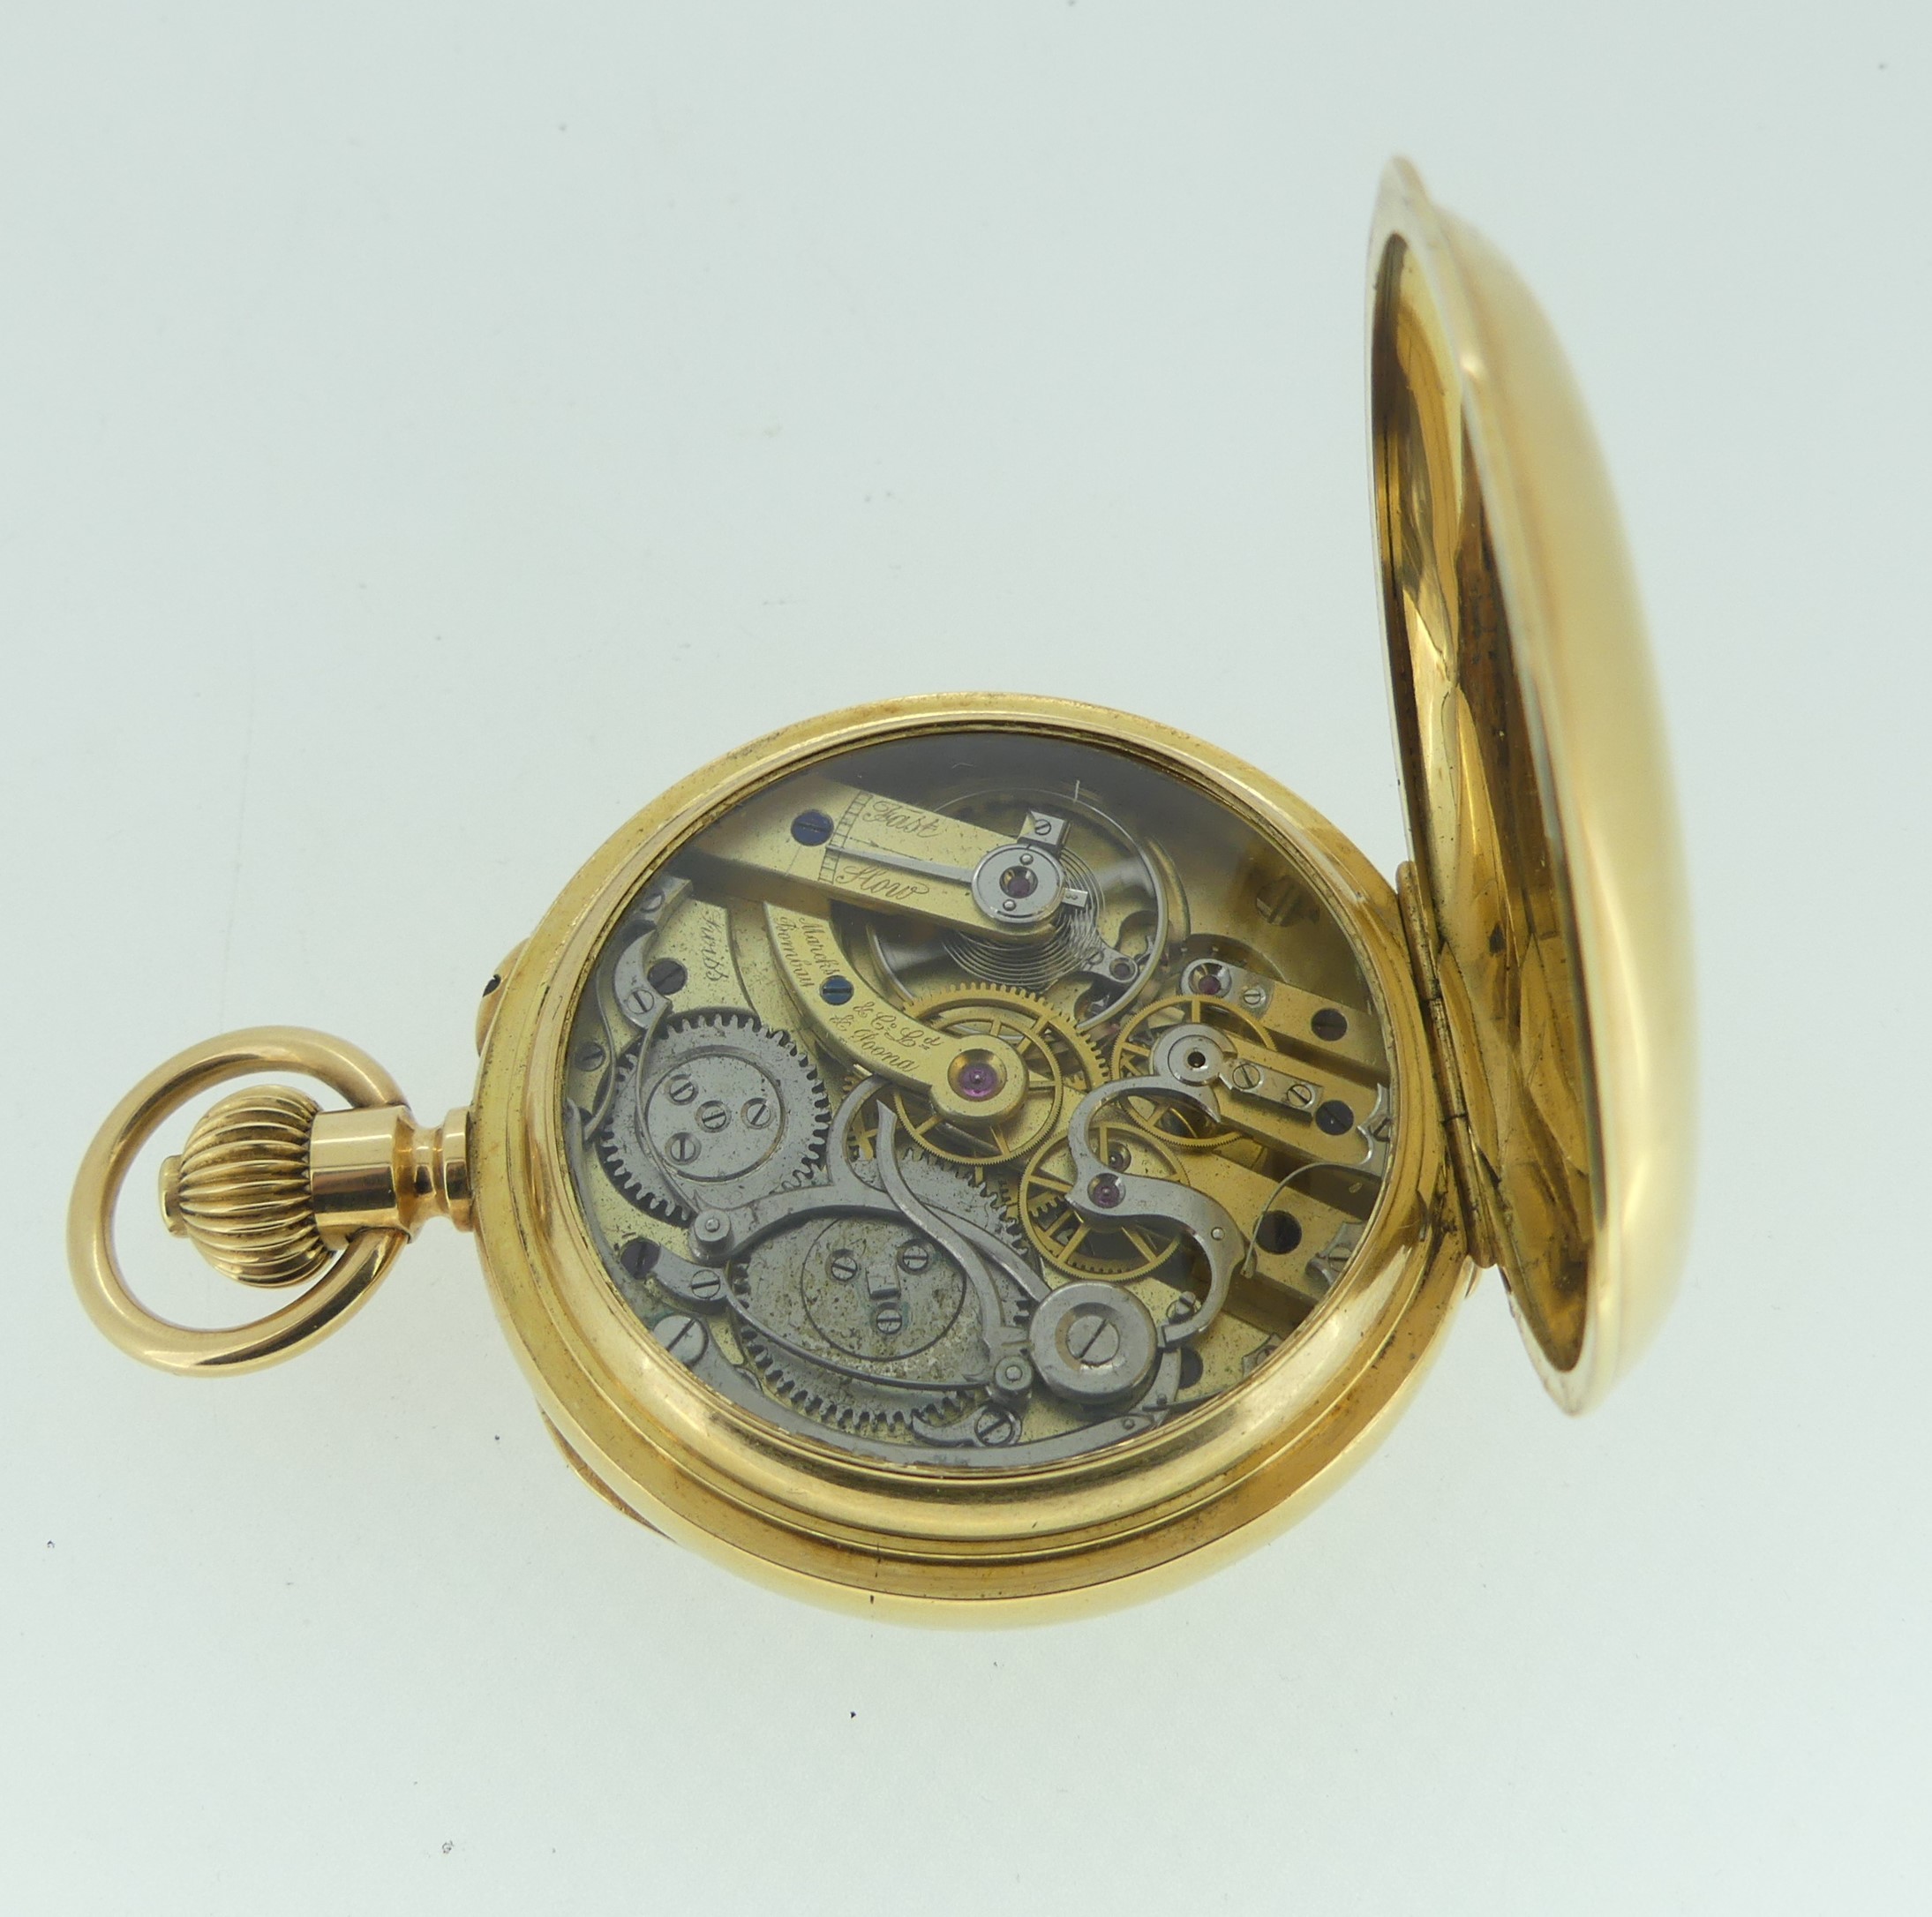 A Continental 18ct gold open face chronograph Pocket Watch, Marcks & Co. Ld., with glazed cuvette, - Image 3 of 7